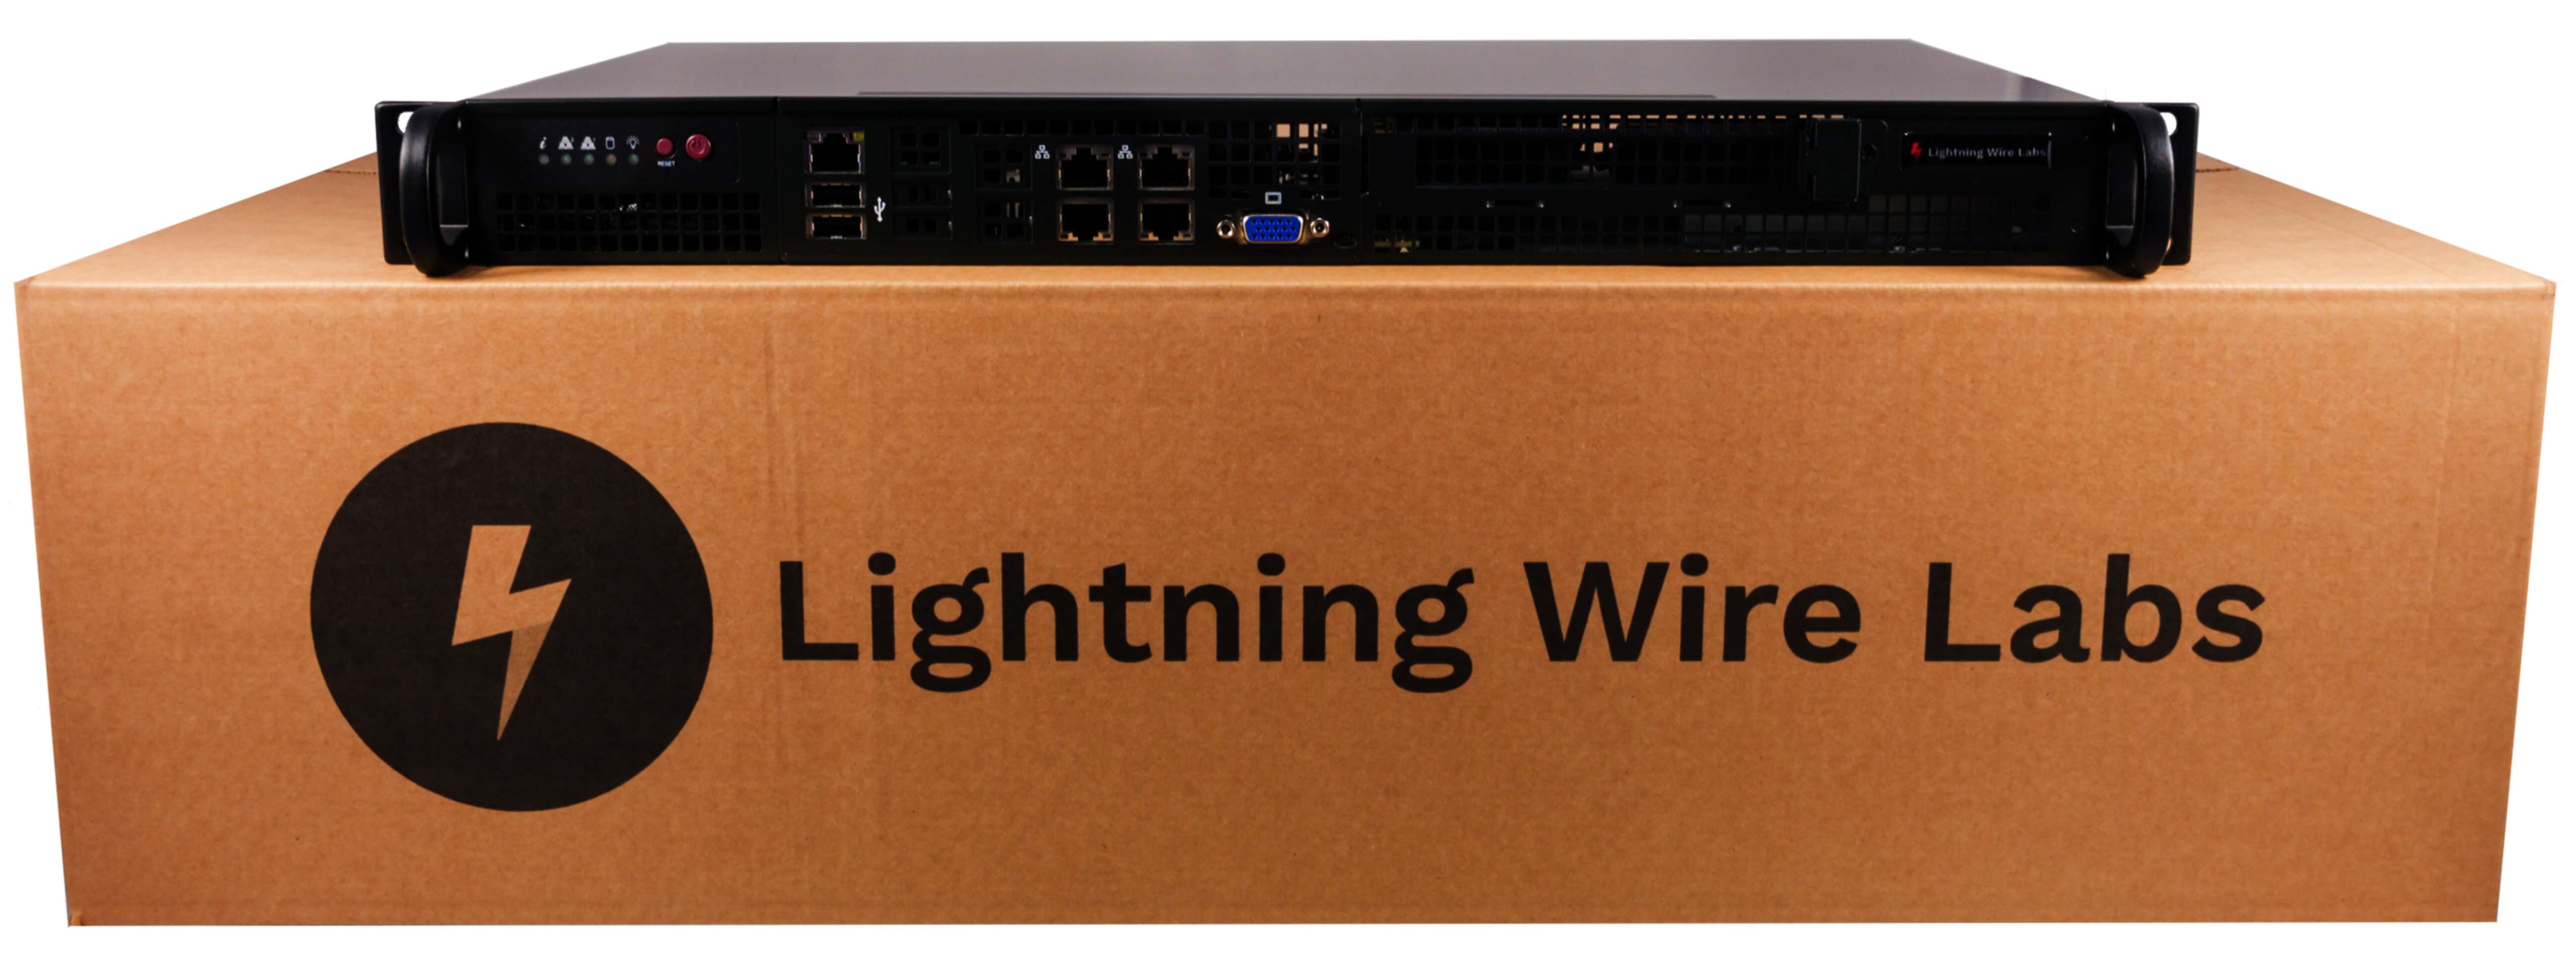 Lightning Wire Labs Appliance on Box